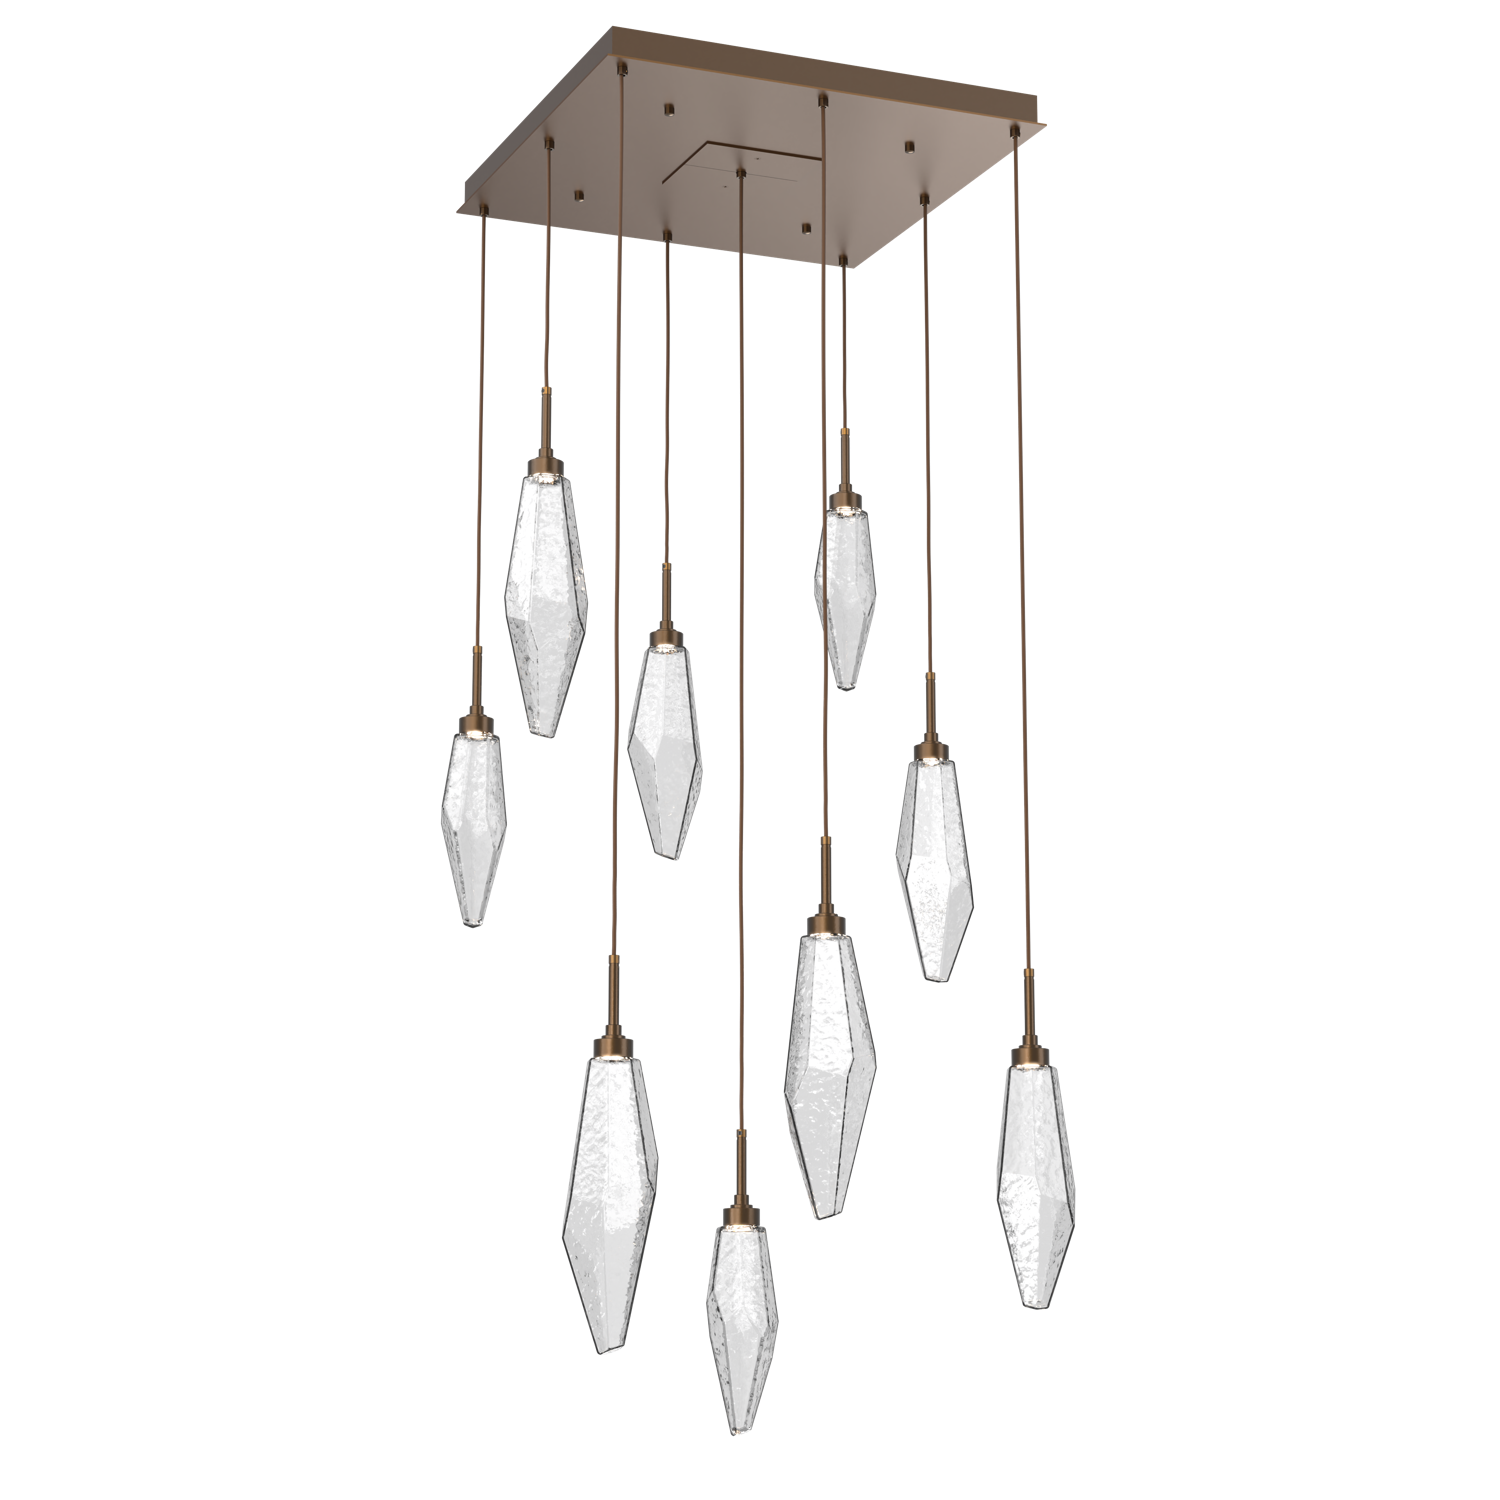 CHB0050-09-FB-CC-Hammerton-Studio-Rock-Crystal-9-light-square-pendant-chandelier-with-flat-bronze-finish-and-clear-glass-shades-and-LED-lamping